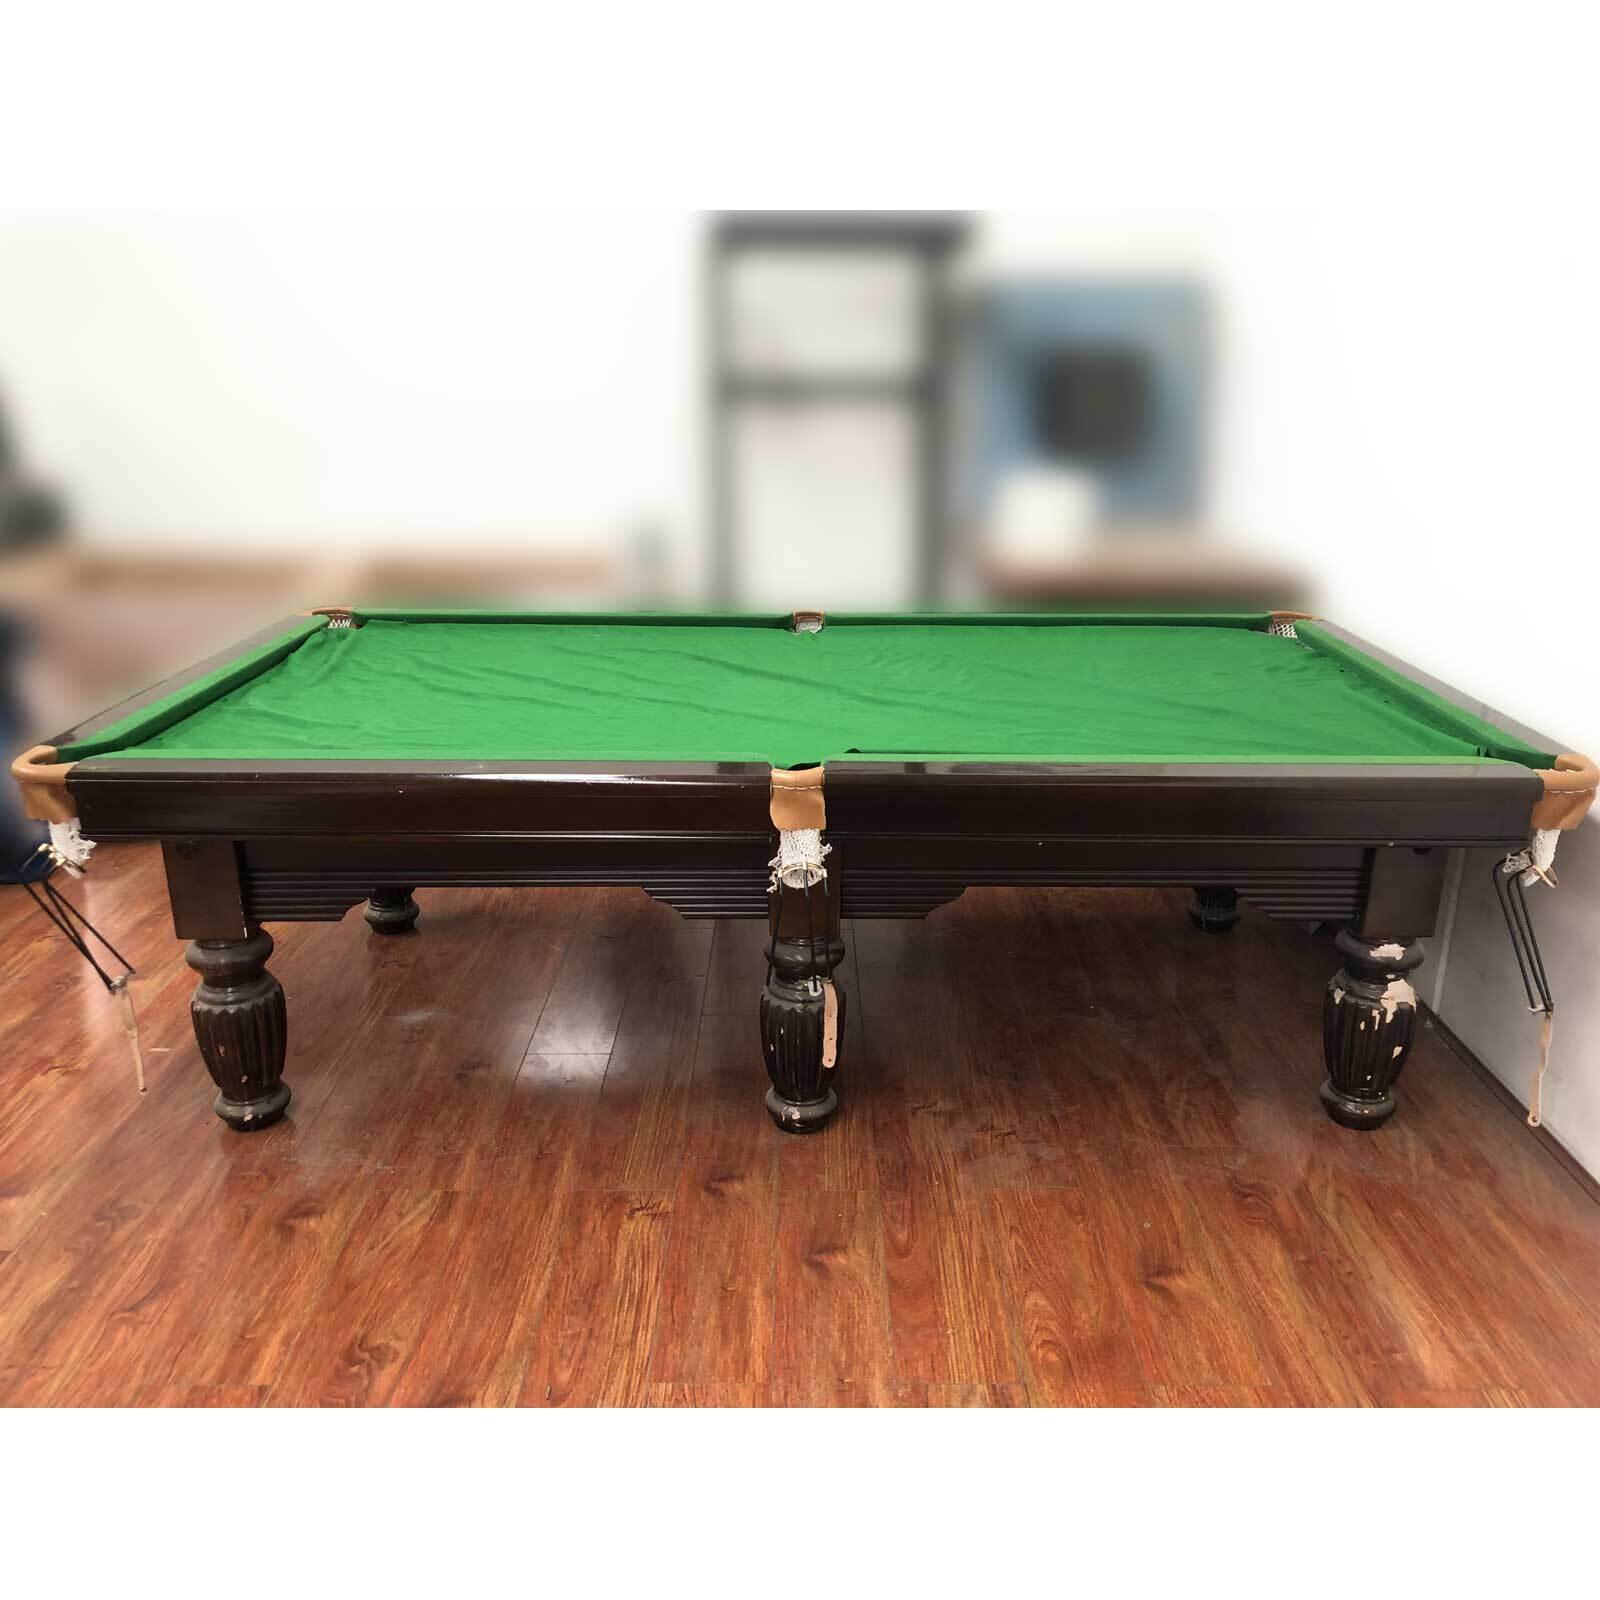 Melbourne Special - 9ft 3pcs Slate Second hand Pool Table. As is condition.